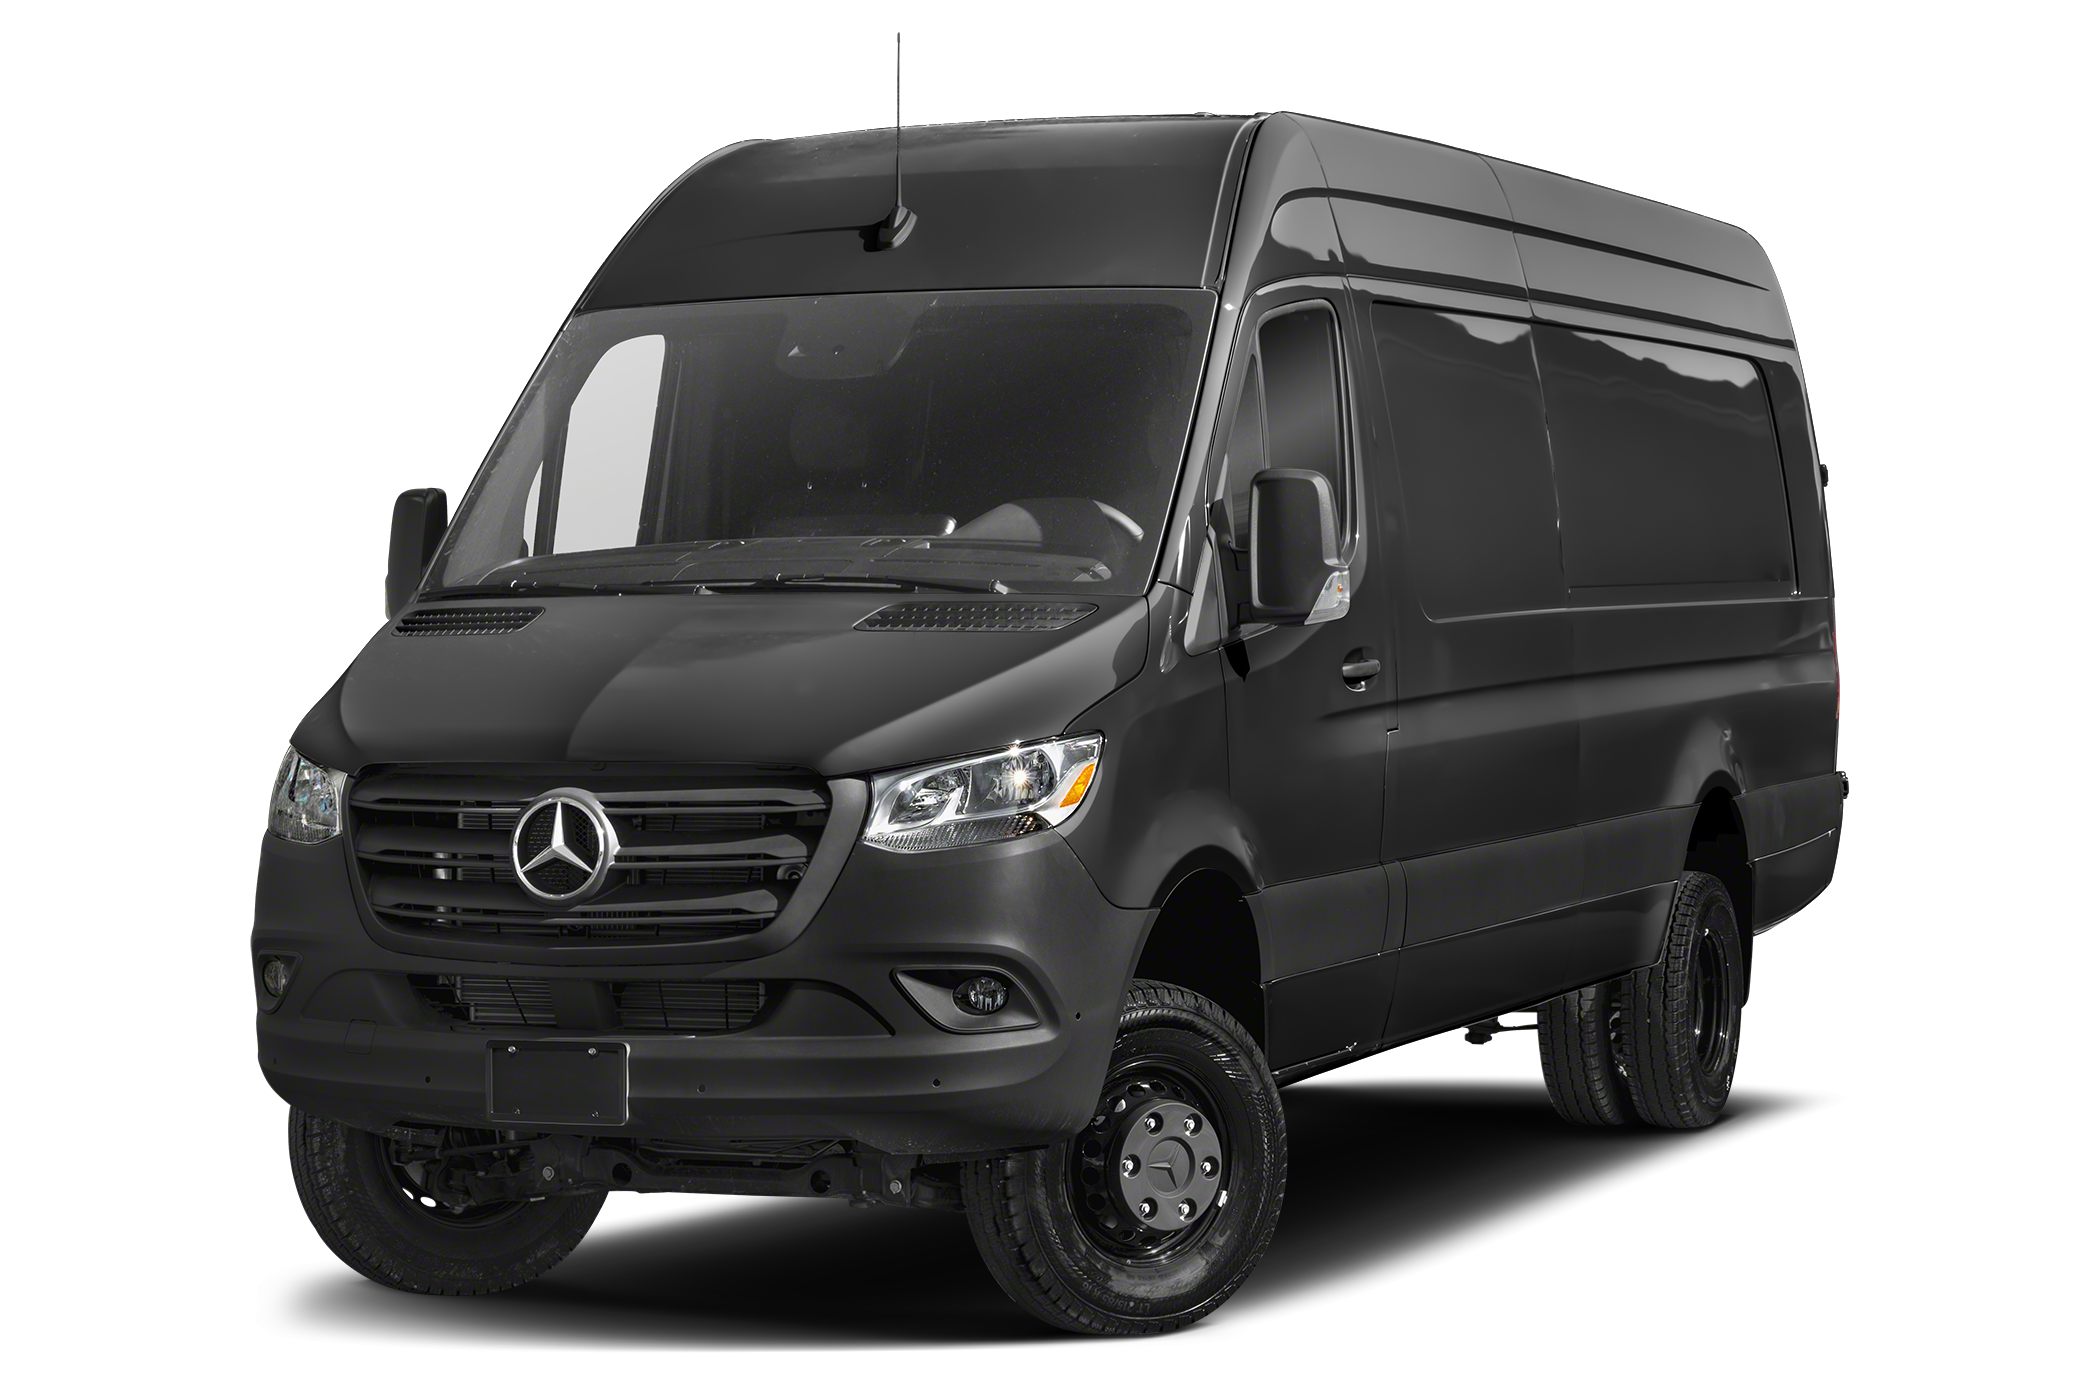 2020 Mercedes Benz Sprinter 3500 High Roof V6 Sprinter 3500 Extended Cargo Van 170 In Wb Specs And Prices